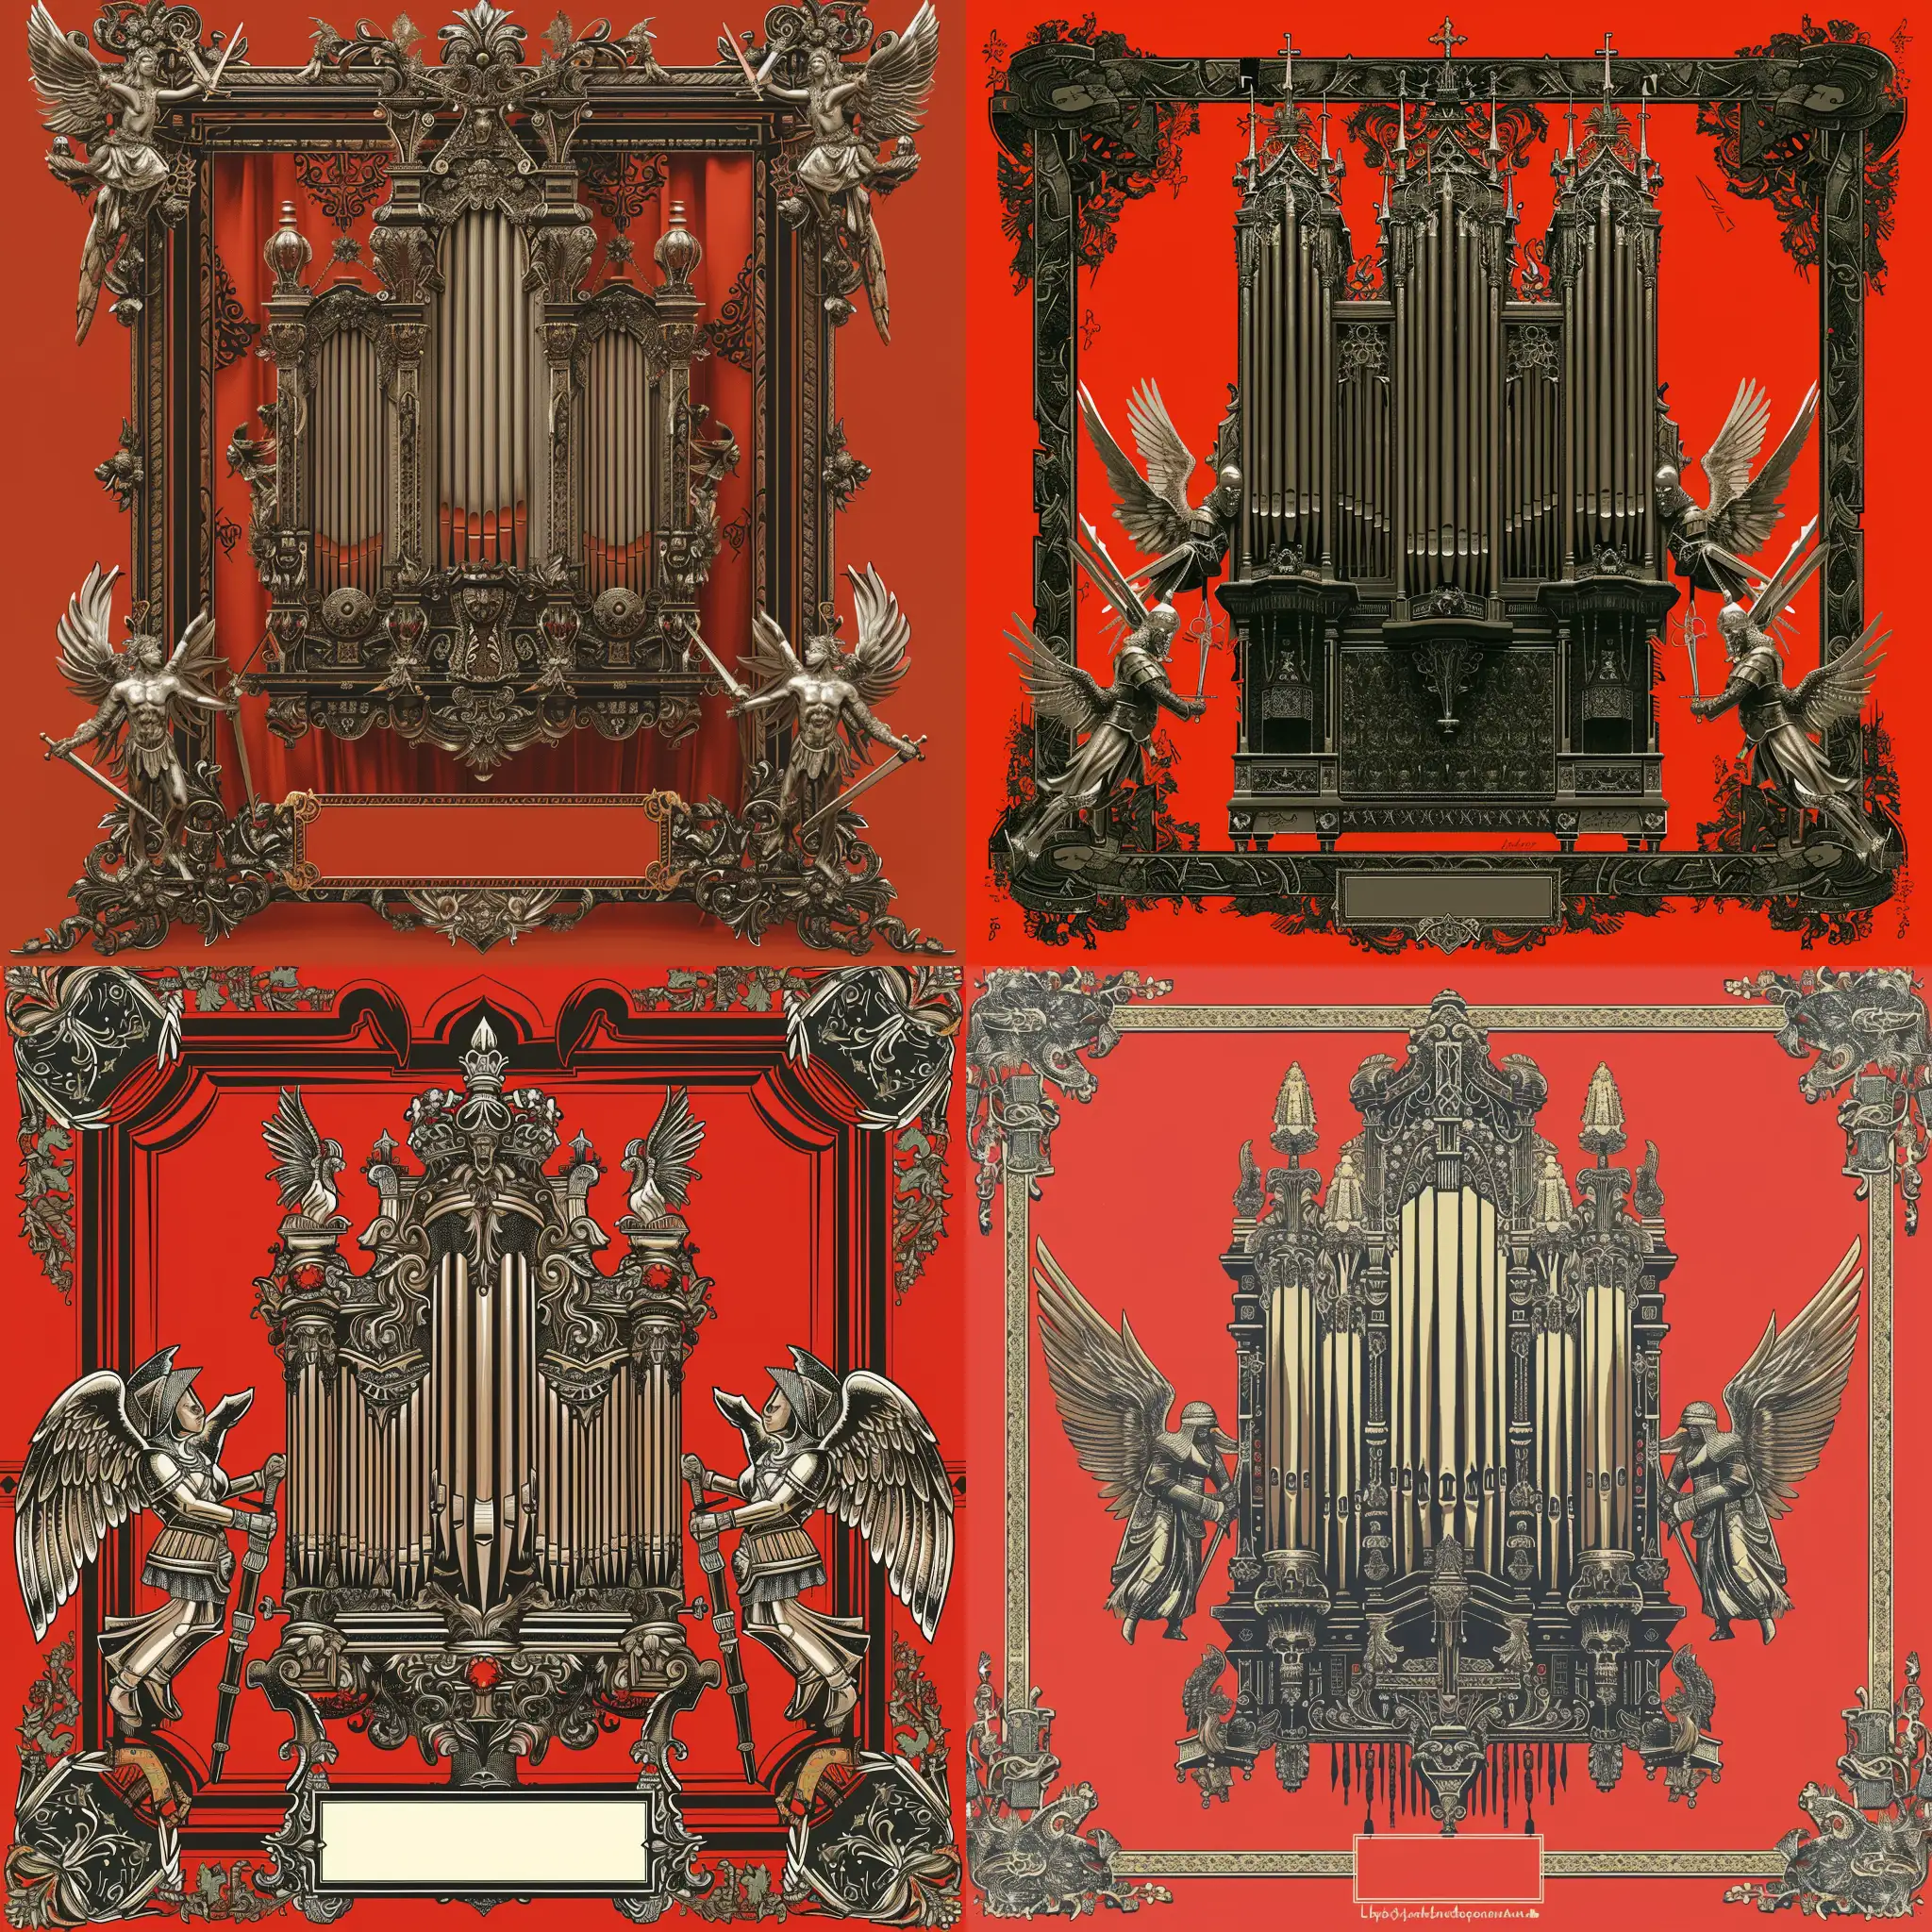 Gothic-Slavic-Organ-with-Angelic-Warriors-in-Red-Background